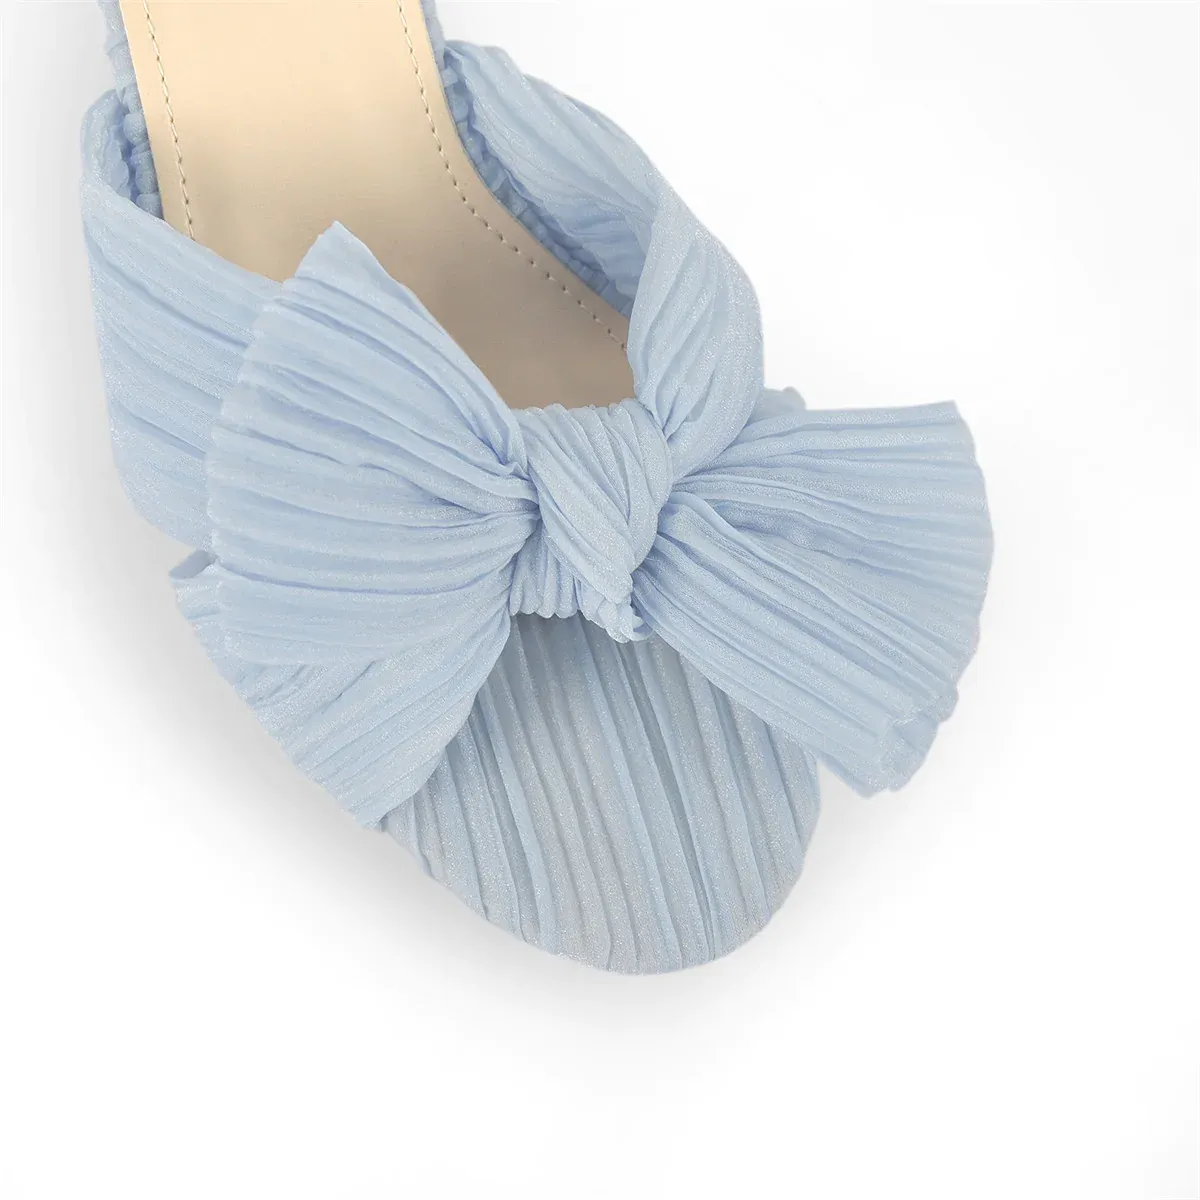 Women's Chunky Heel Pleated Bow Sandals